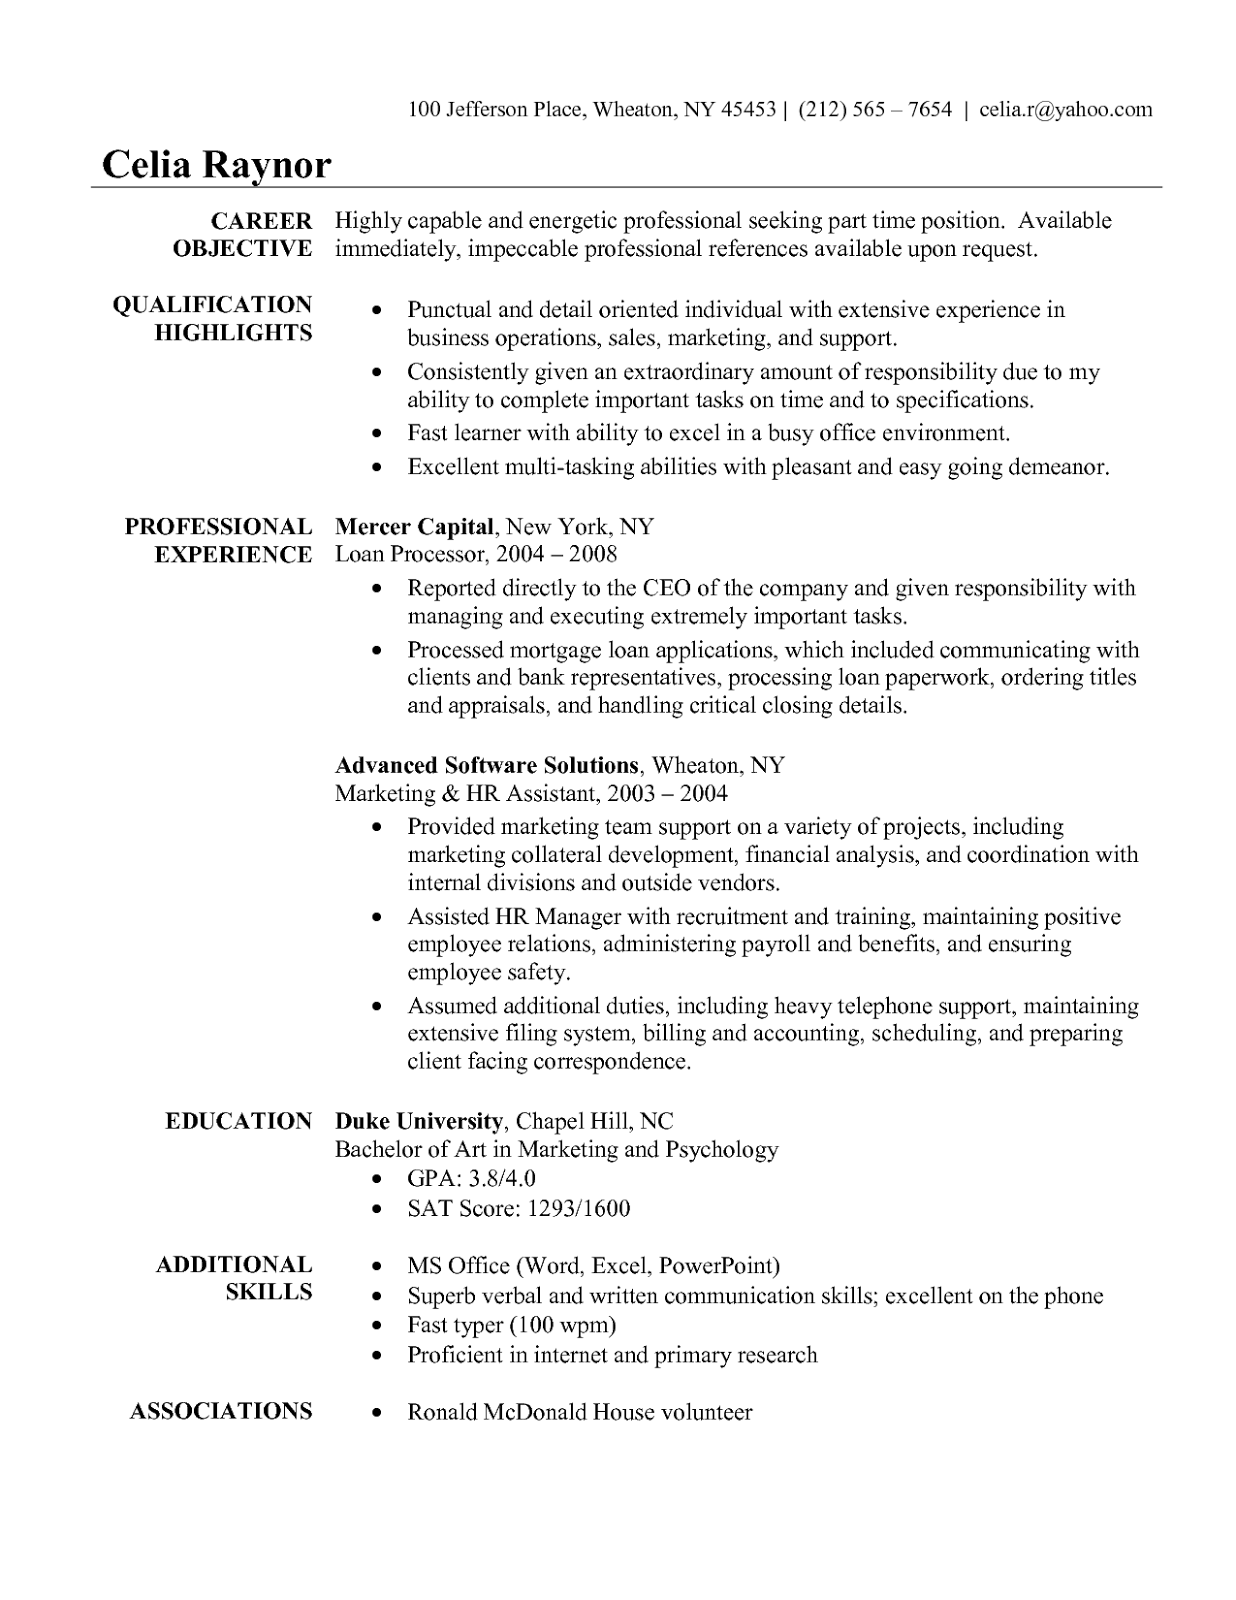 Resume examples for office administrator